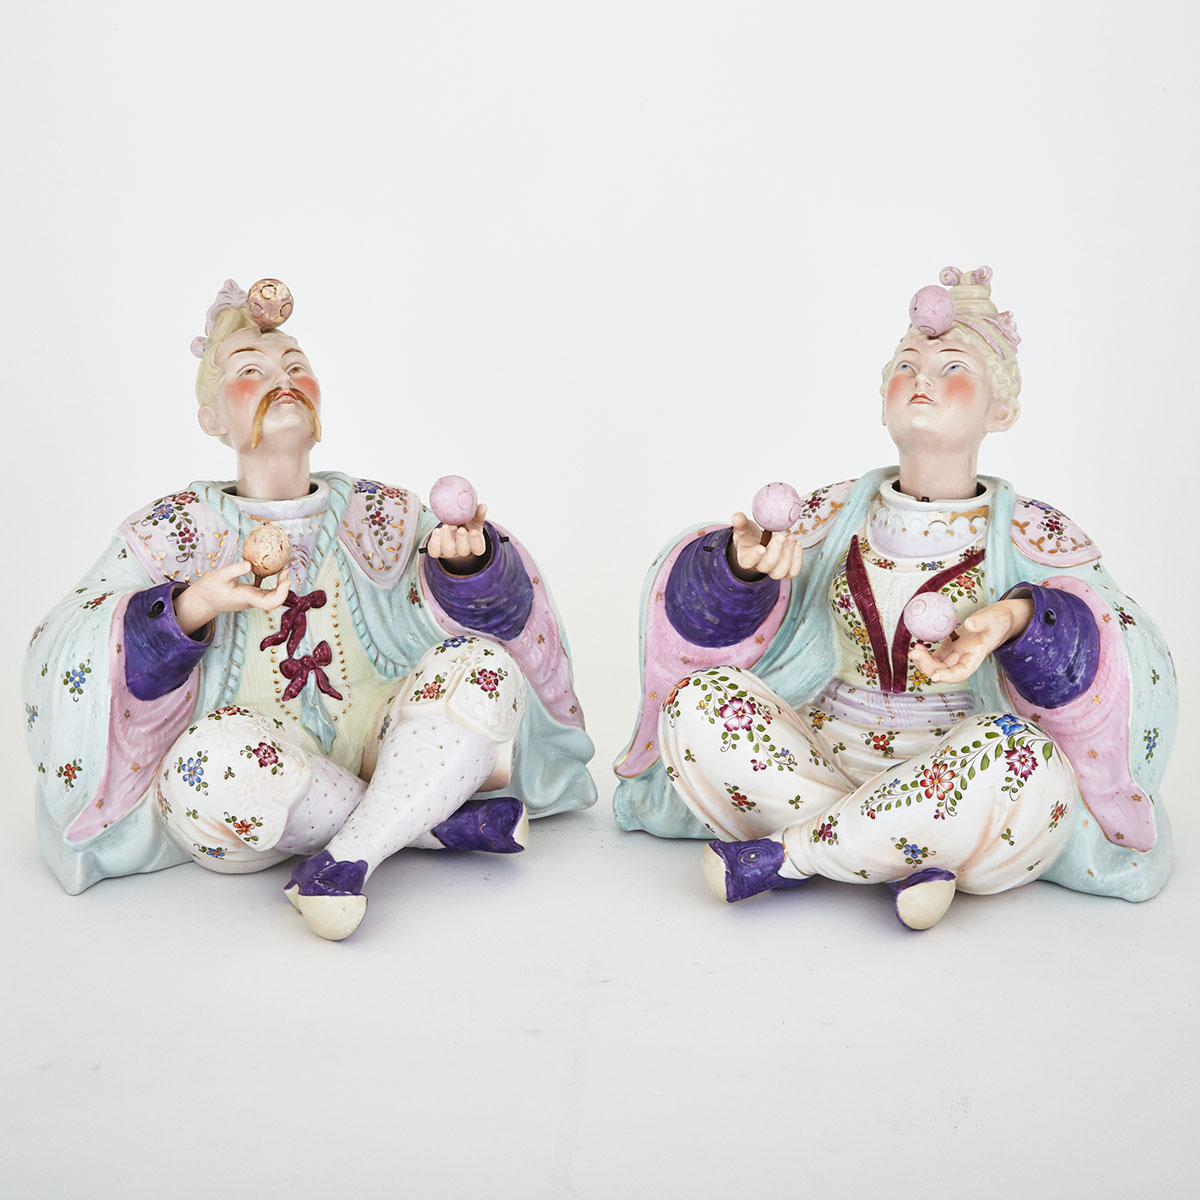 Pair of Continental Porcelain Nodding Jugglers, probably Dresden, late 19th century